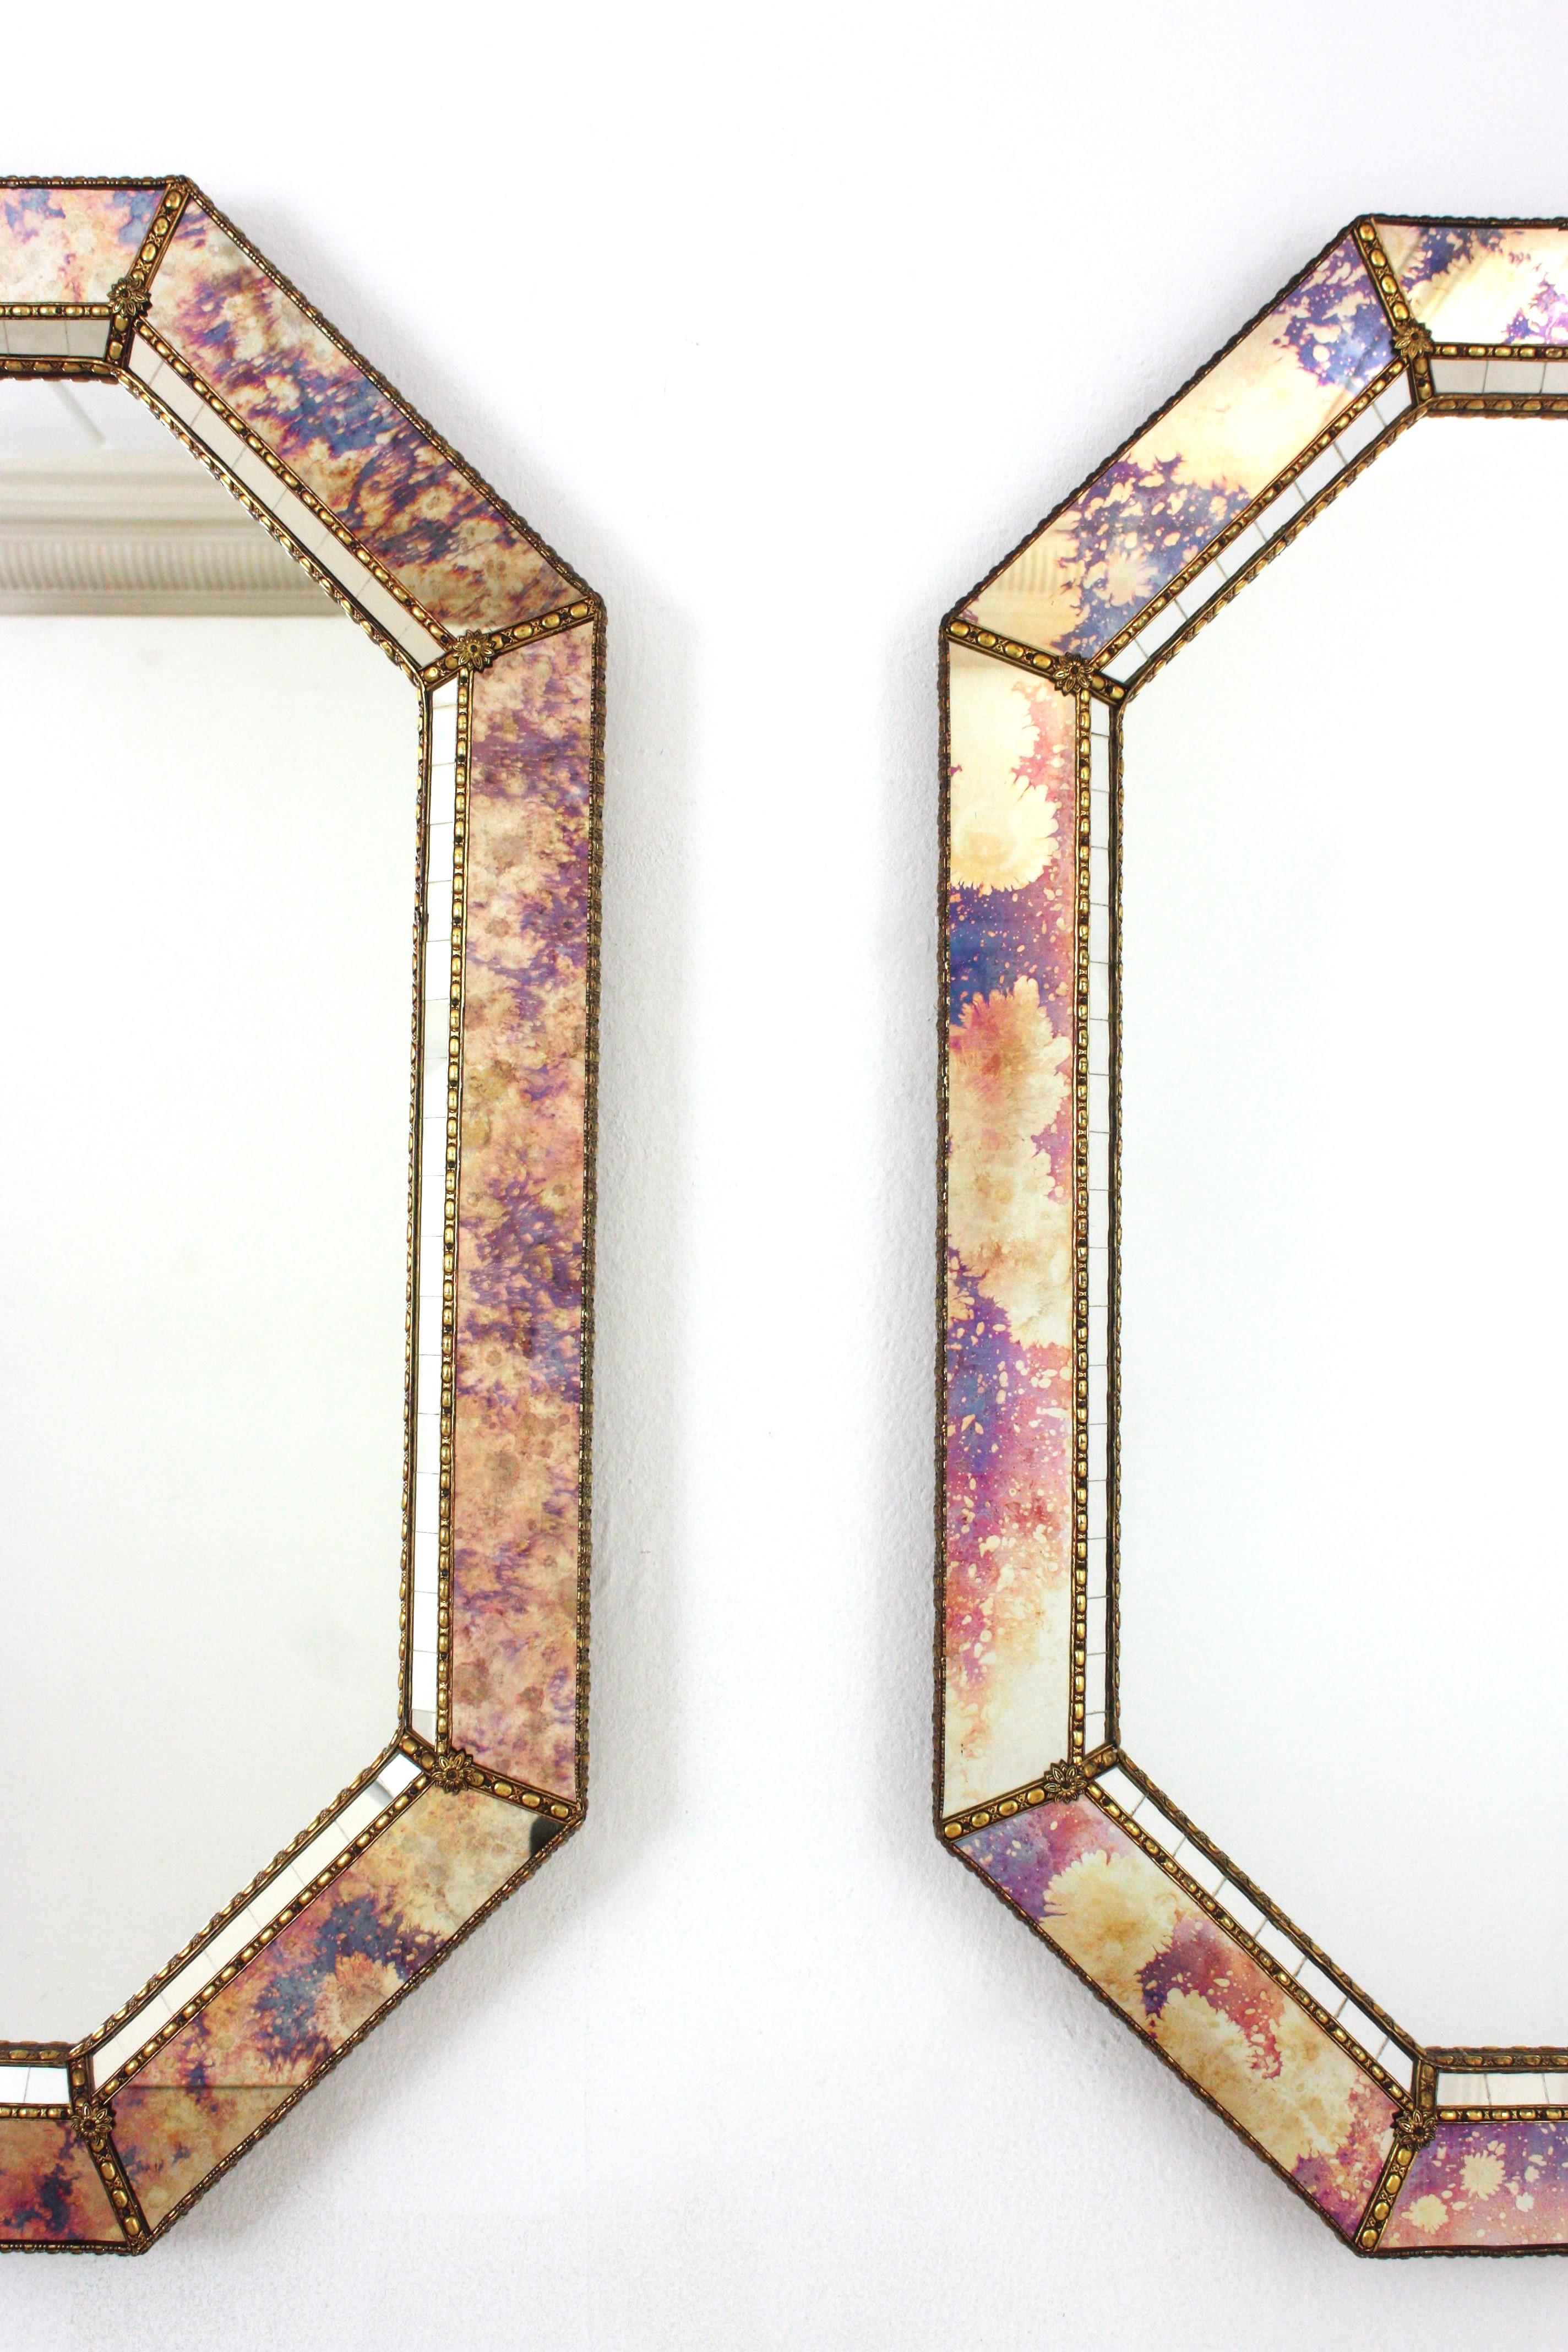 Spanish Octagonal Venetian Style Mirrors with Pink Purple Glass & Brass Details, Pair For Sale